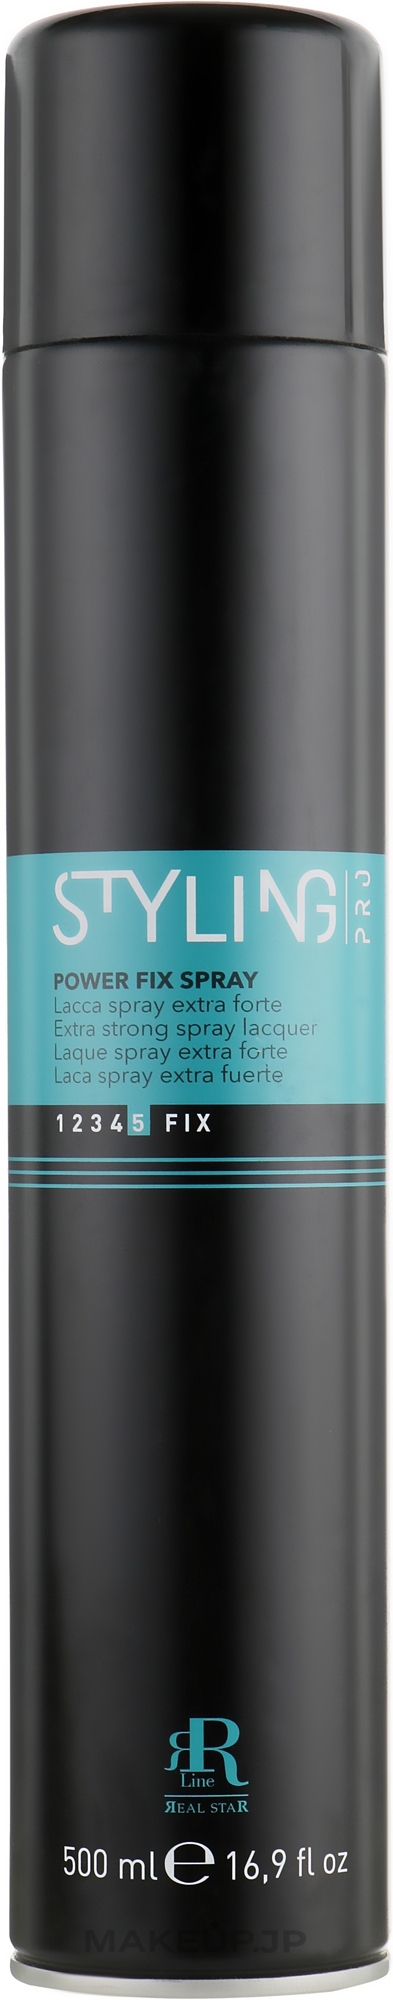 Super Strong Hold Hair Spray - RR LINE Styling Pro Power Fix Spray — photo 500 ml